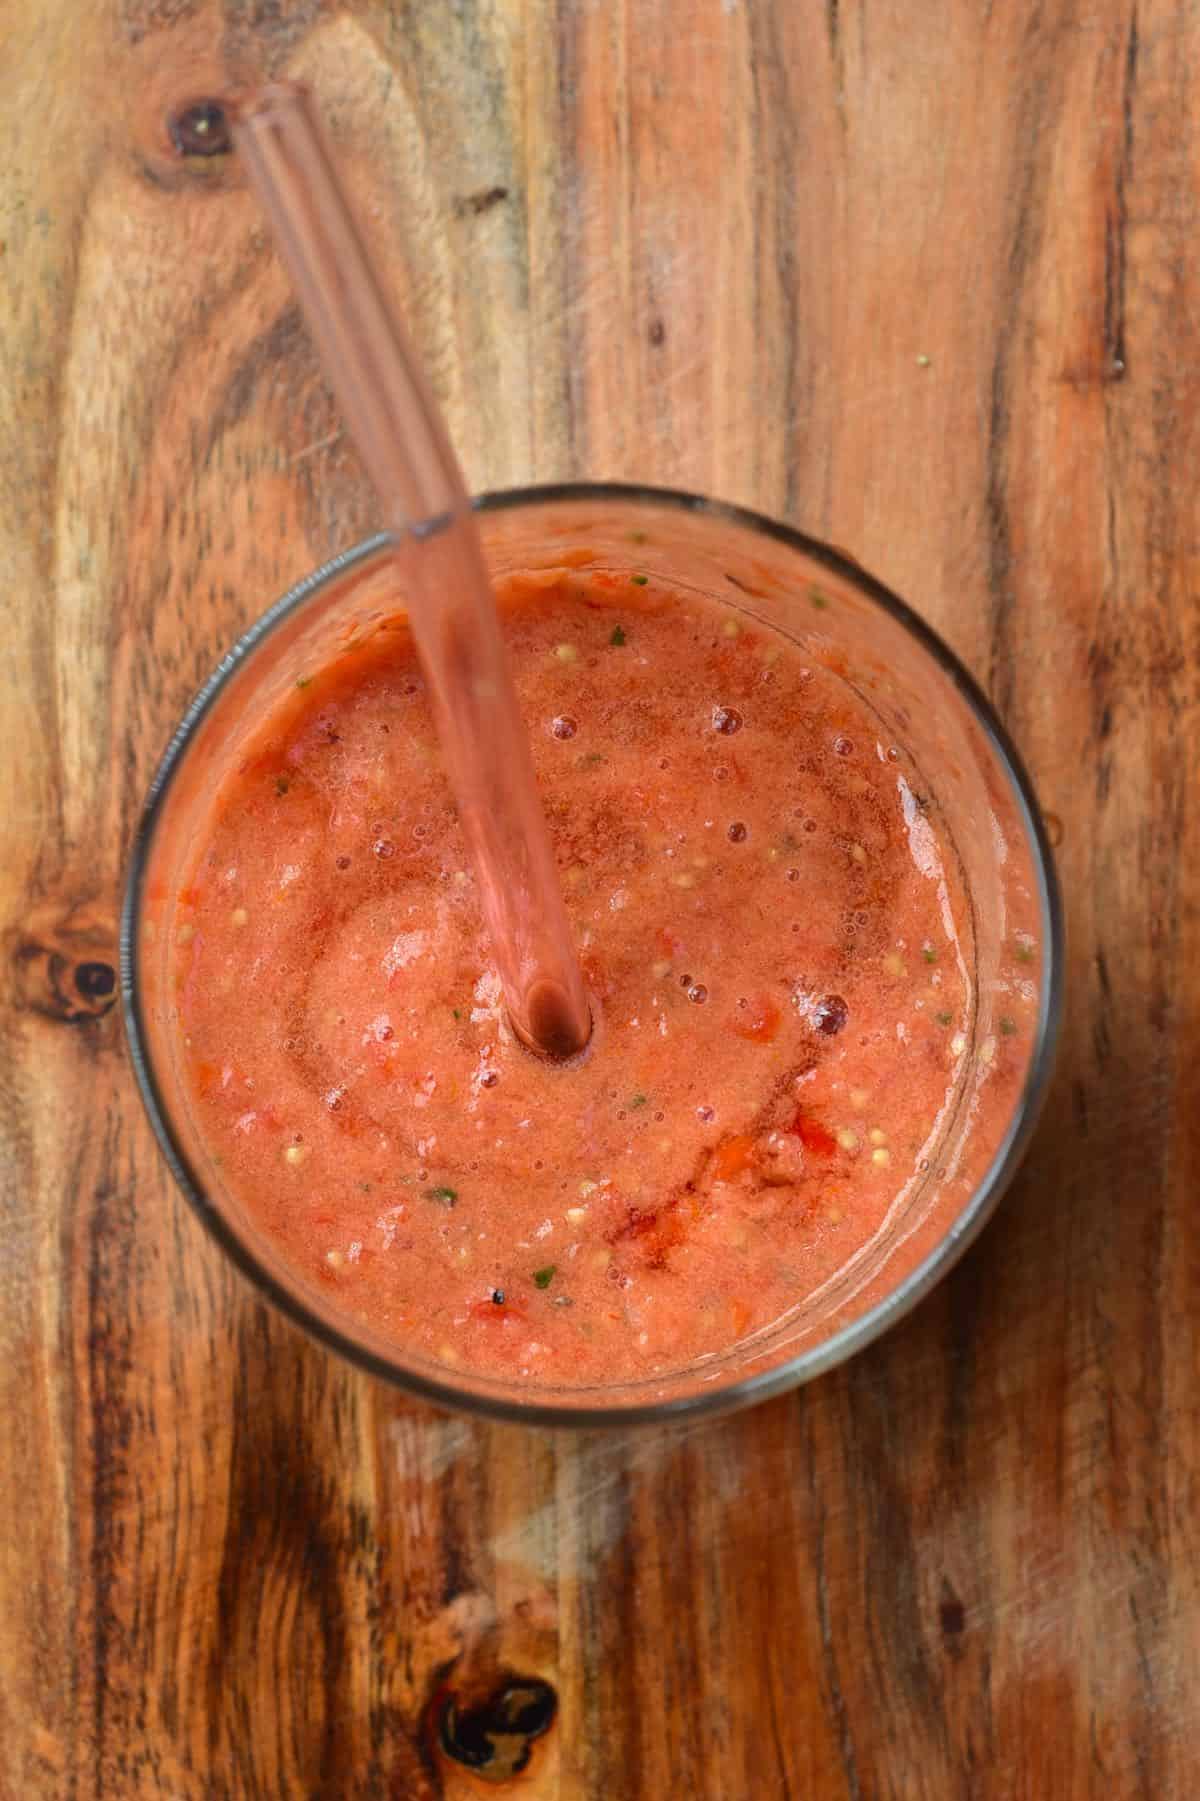 Top view of a glass full with gazpacho with a glass straw